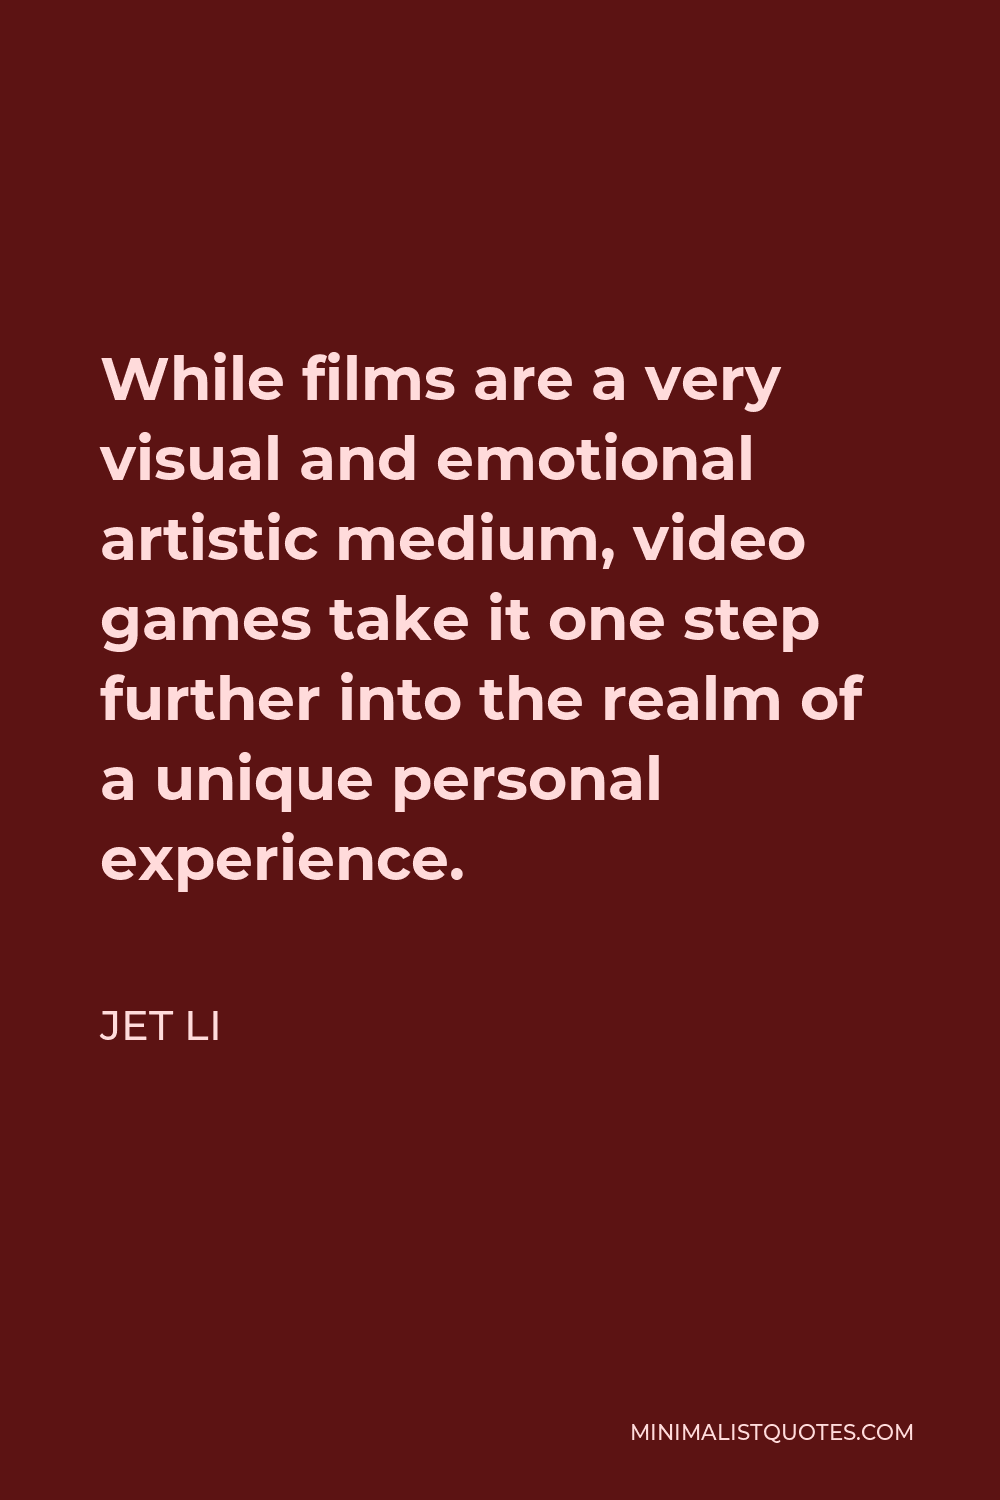 Jet Li Quote - While films are a very visual and emotional artistic medium, video games take it one step further into the realm of a unique personal experience.